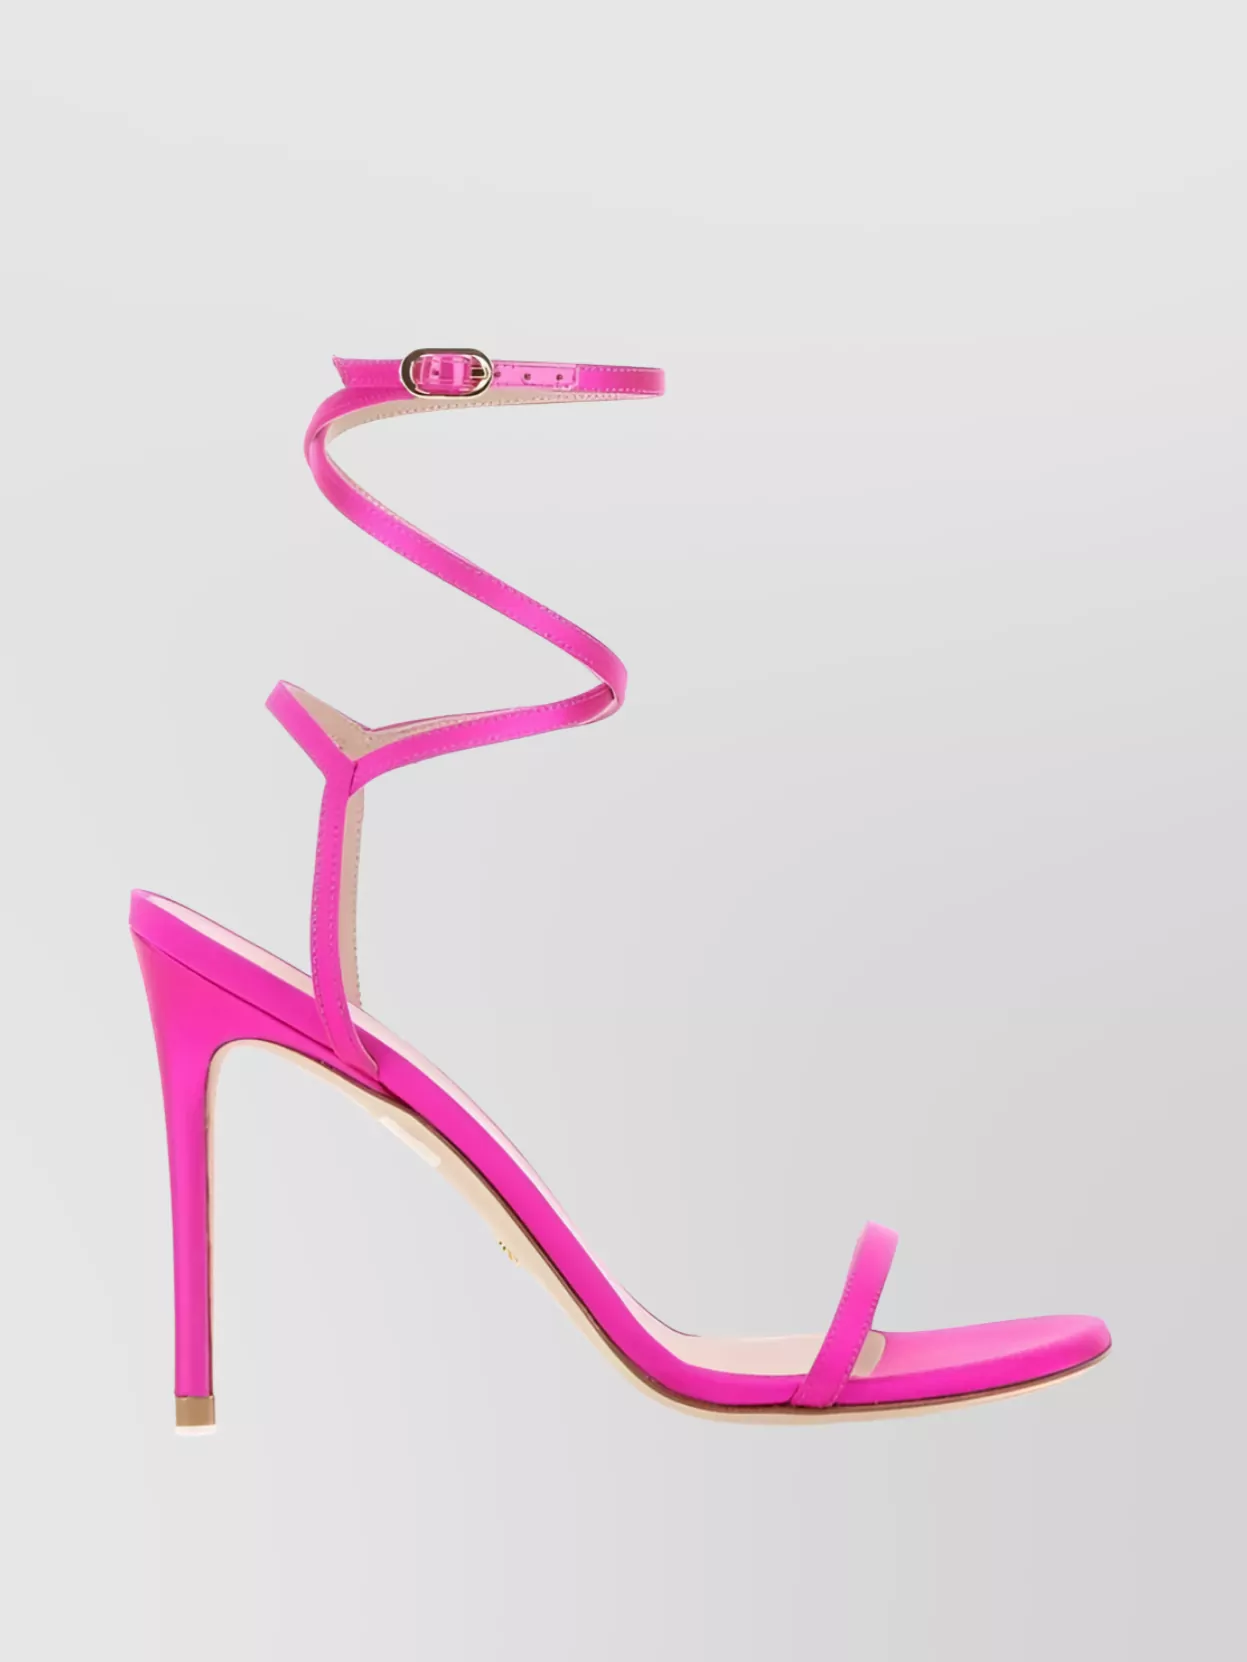 Shop Stuart Weitzman High Heel Sandals With Strappy Ankle Strap In Pastel